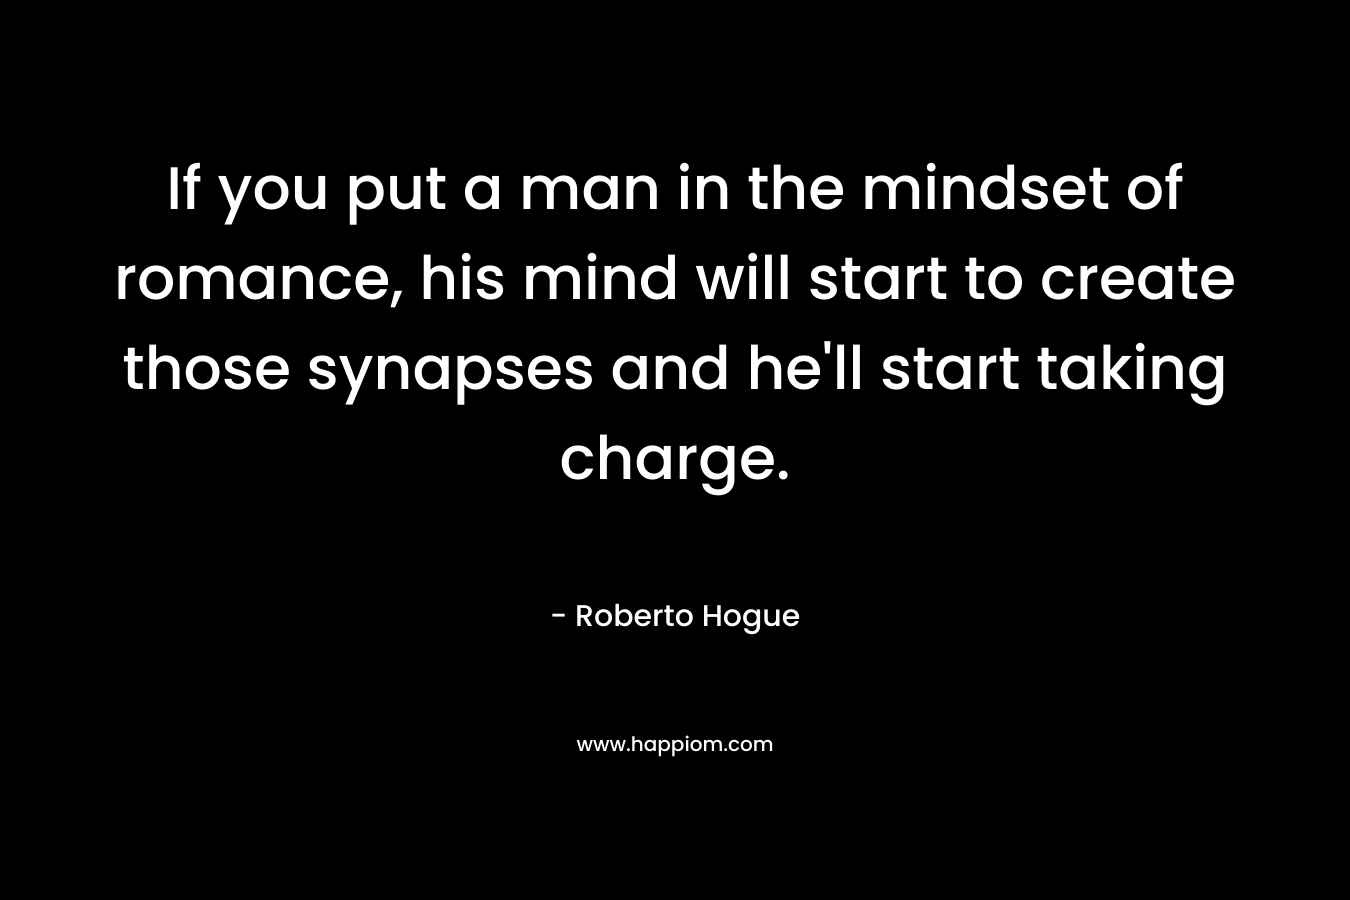 If you put a man in the mindset of romance, his mind will start to create those synapses and he'll start taking charge.